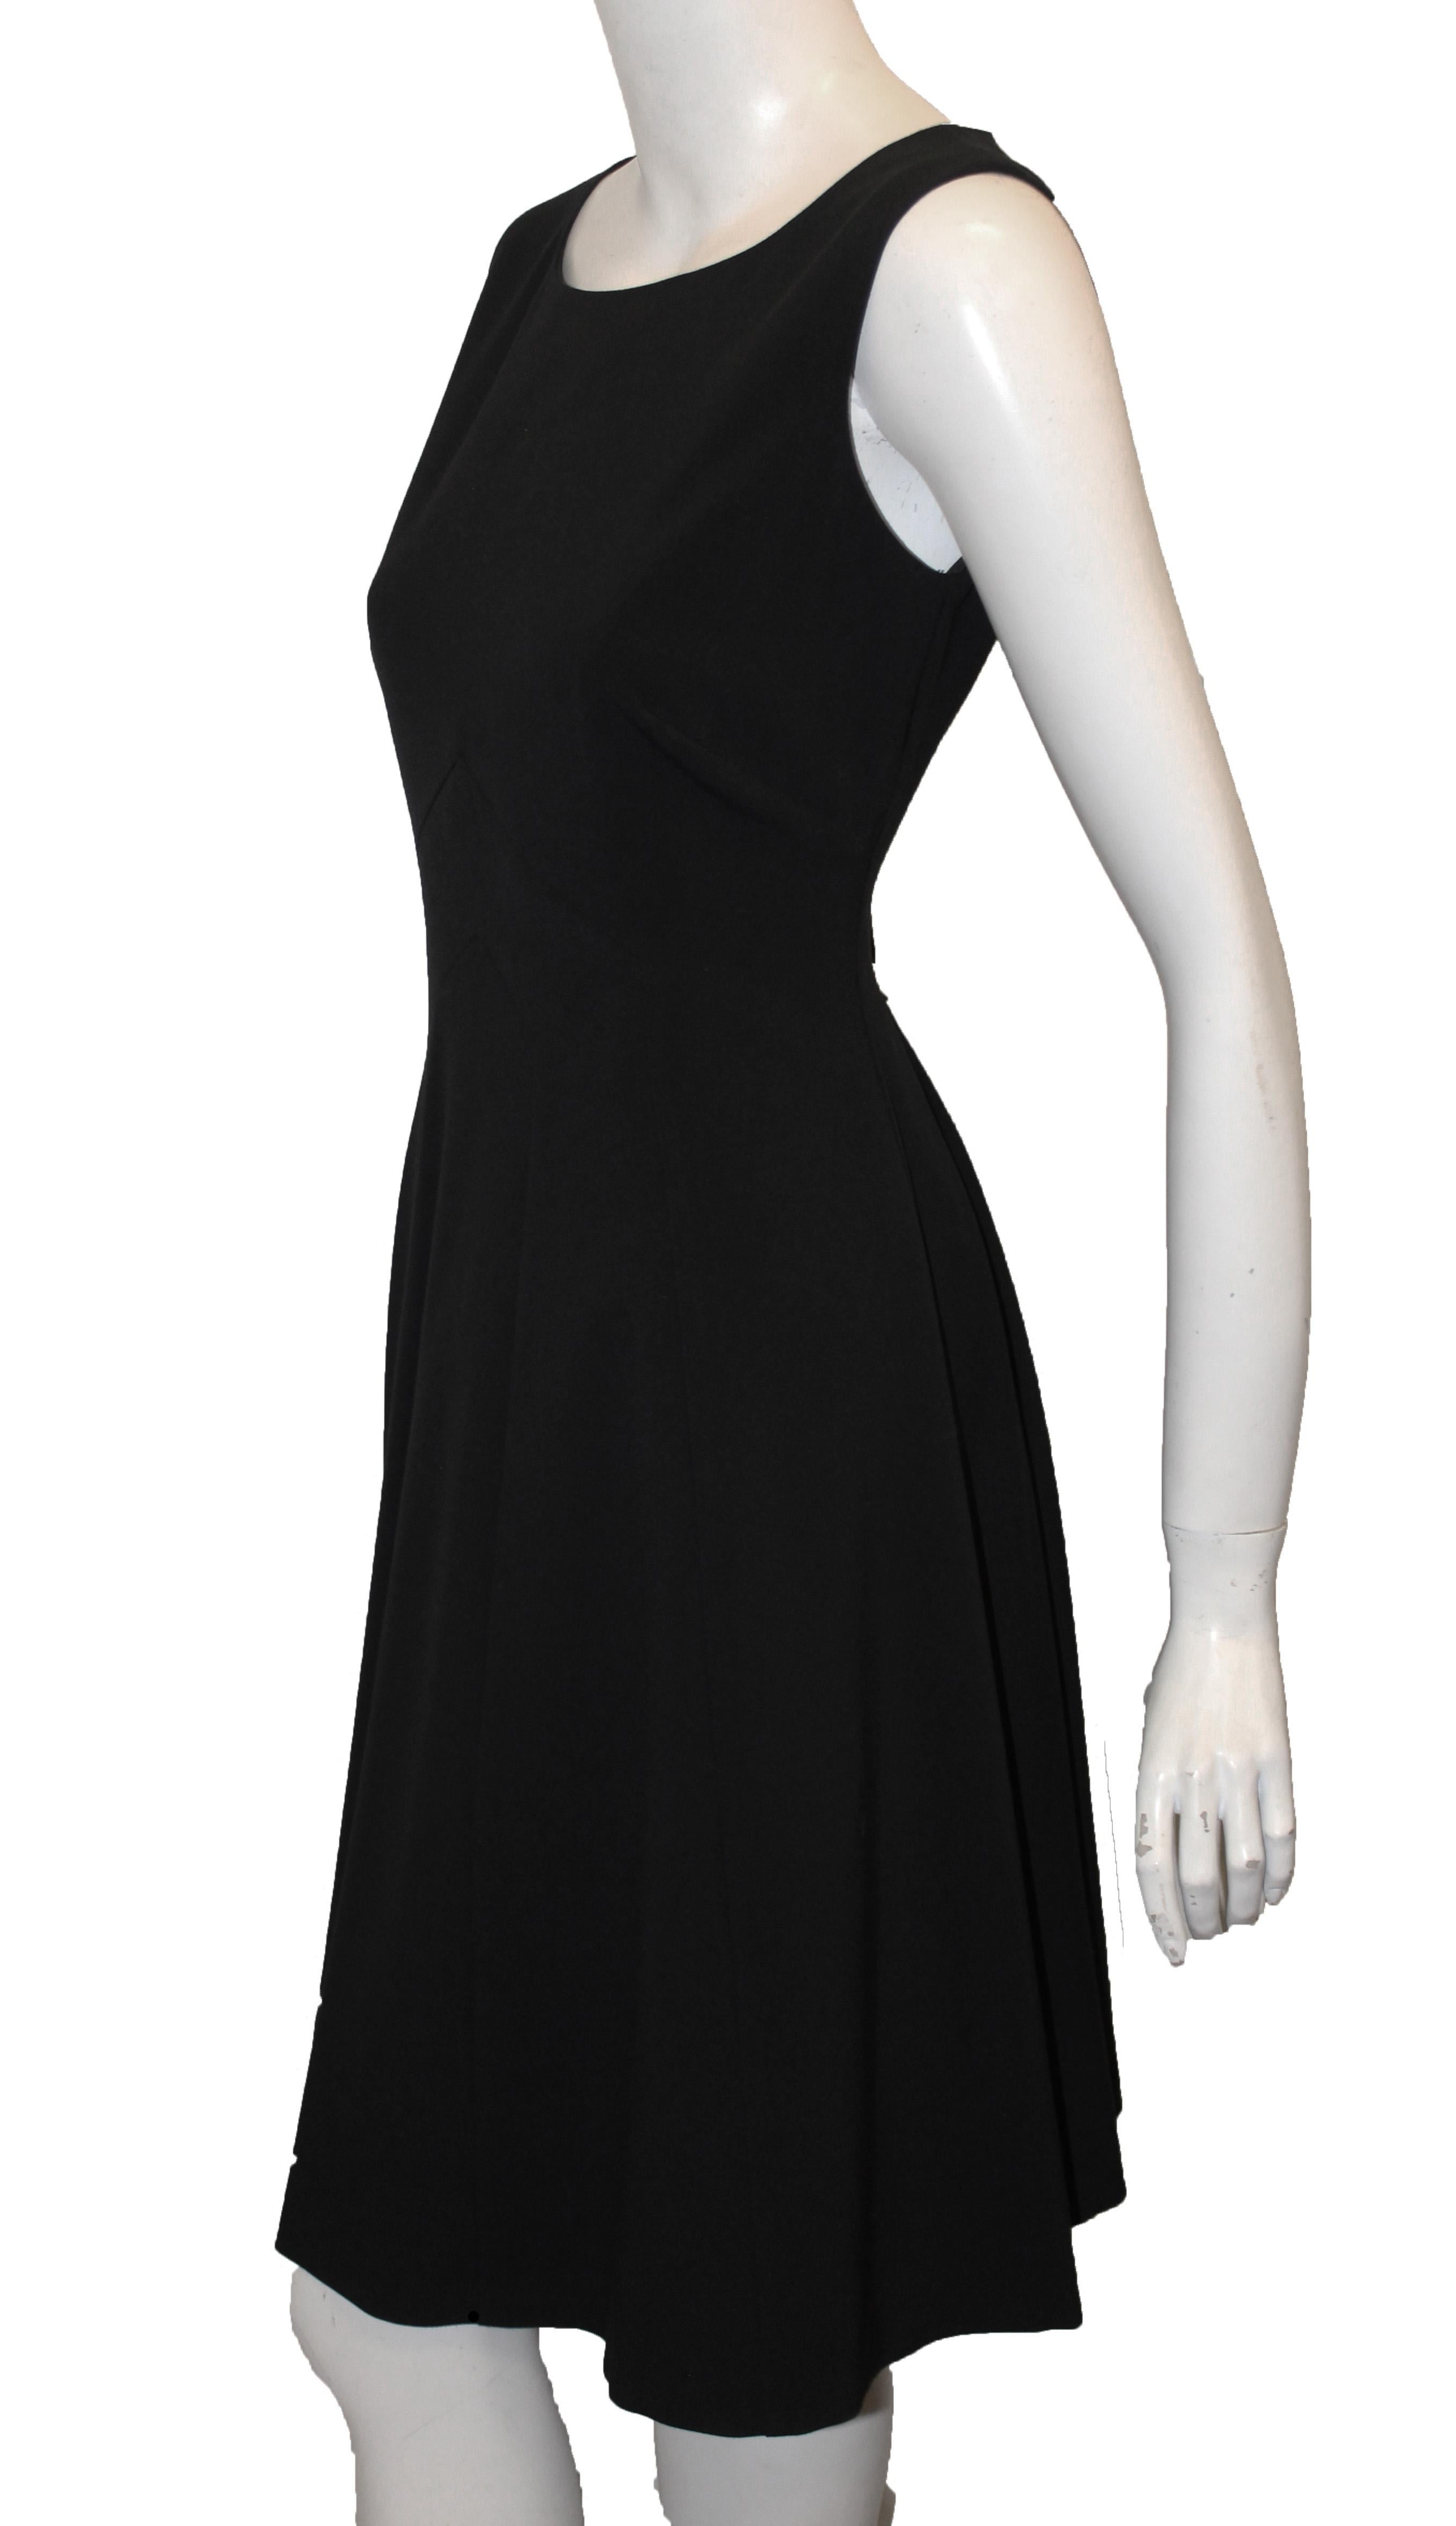 Only Burberry could make such a beautifully tailored sleeveless dress with perfectly tailored shape enhancing seams on the front and back.  Made in England, this simple, classic dress is composed of knitted stretch wool.  Back zipper and slightly